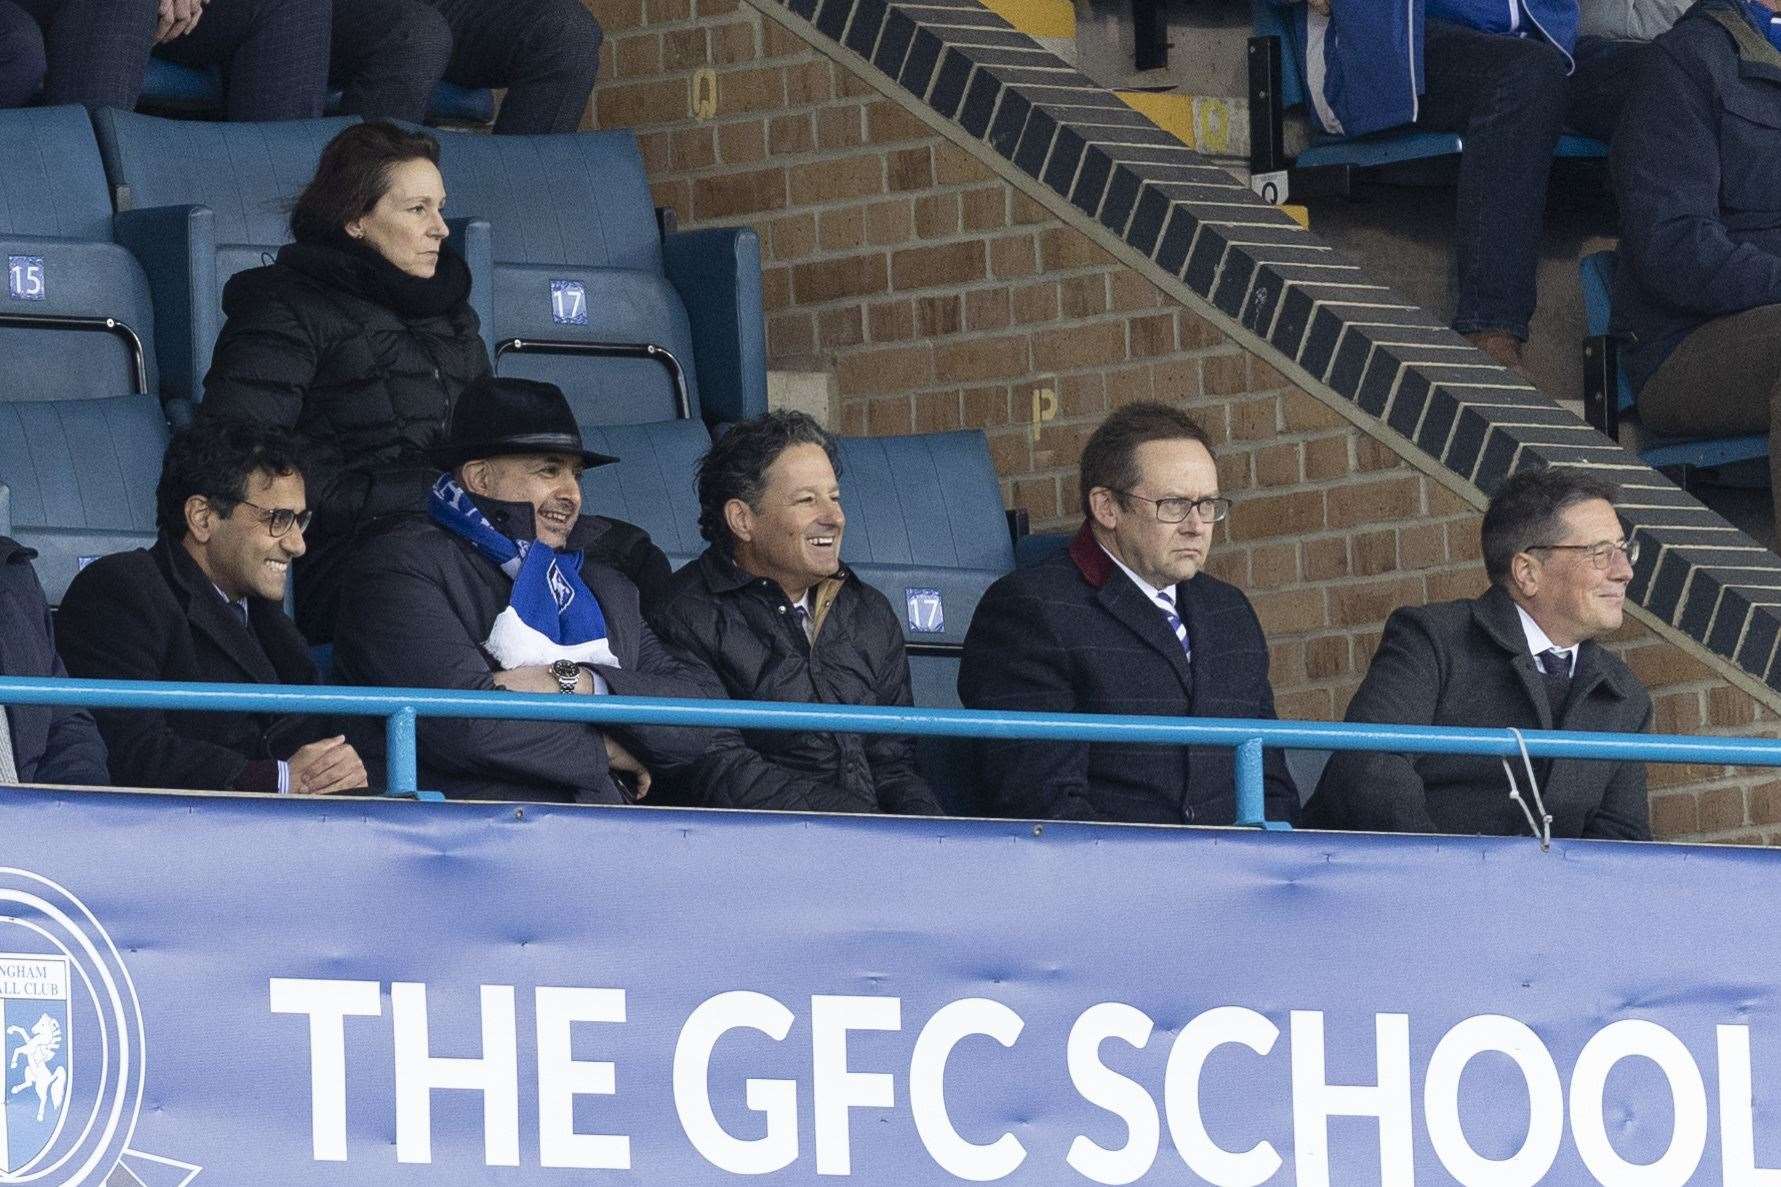 Brad Galinson watching from the directors' box alongside chief operating officer Paul Fisher